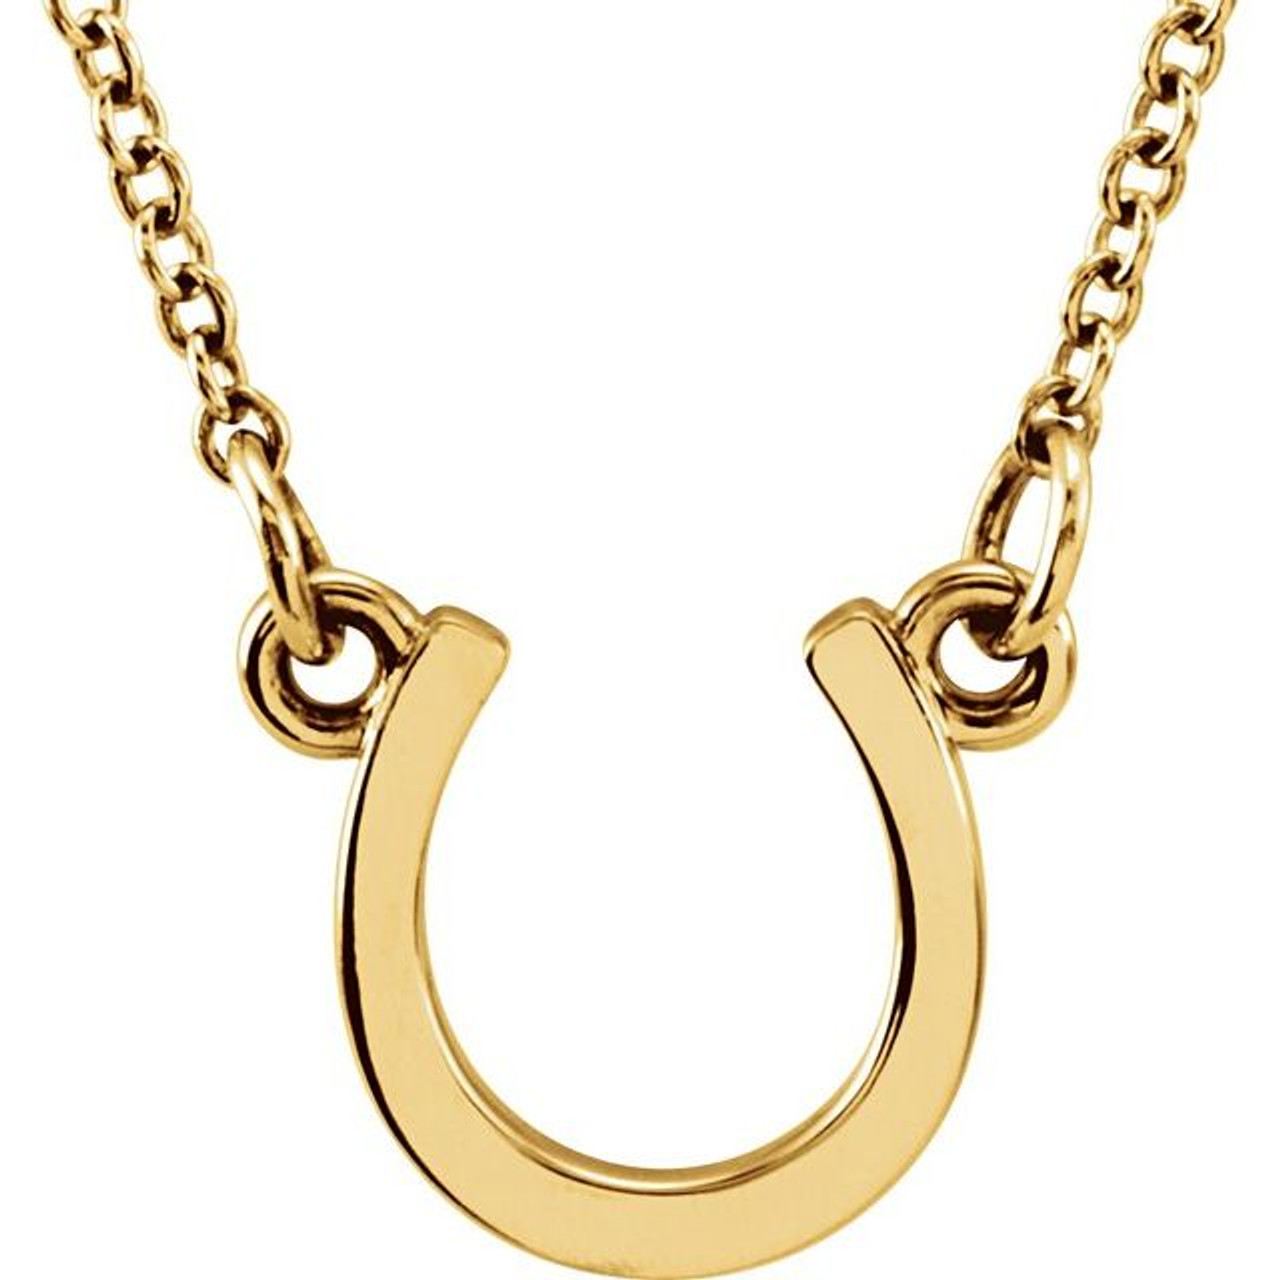  Gold Horseshoe Pendant without Necklace, Small Good Luck Charm  in 14 Kt Yellow, Men Women 14k Charms for Necklaces (up to 4mm)